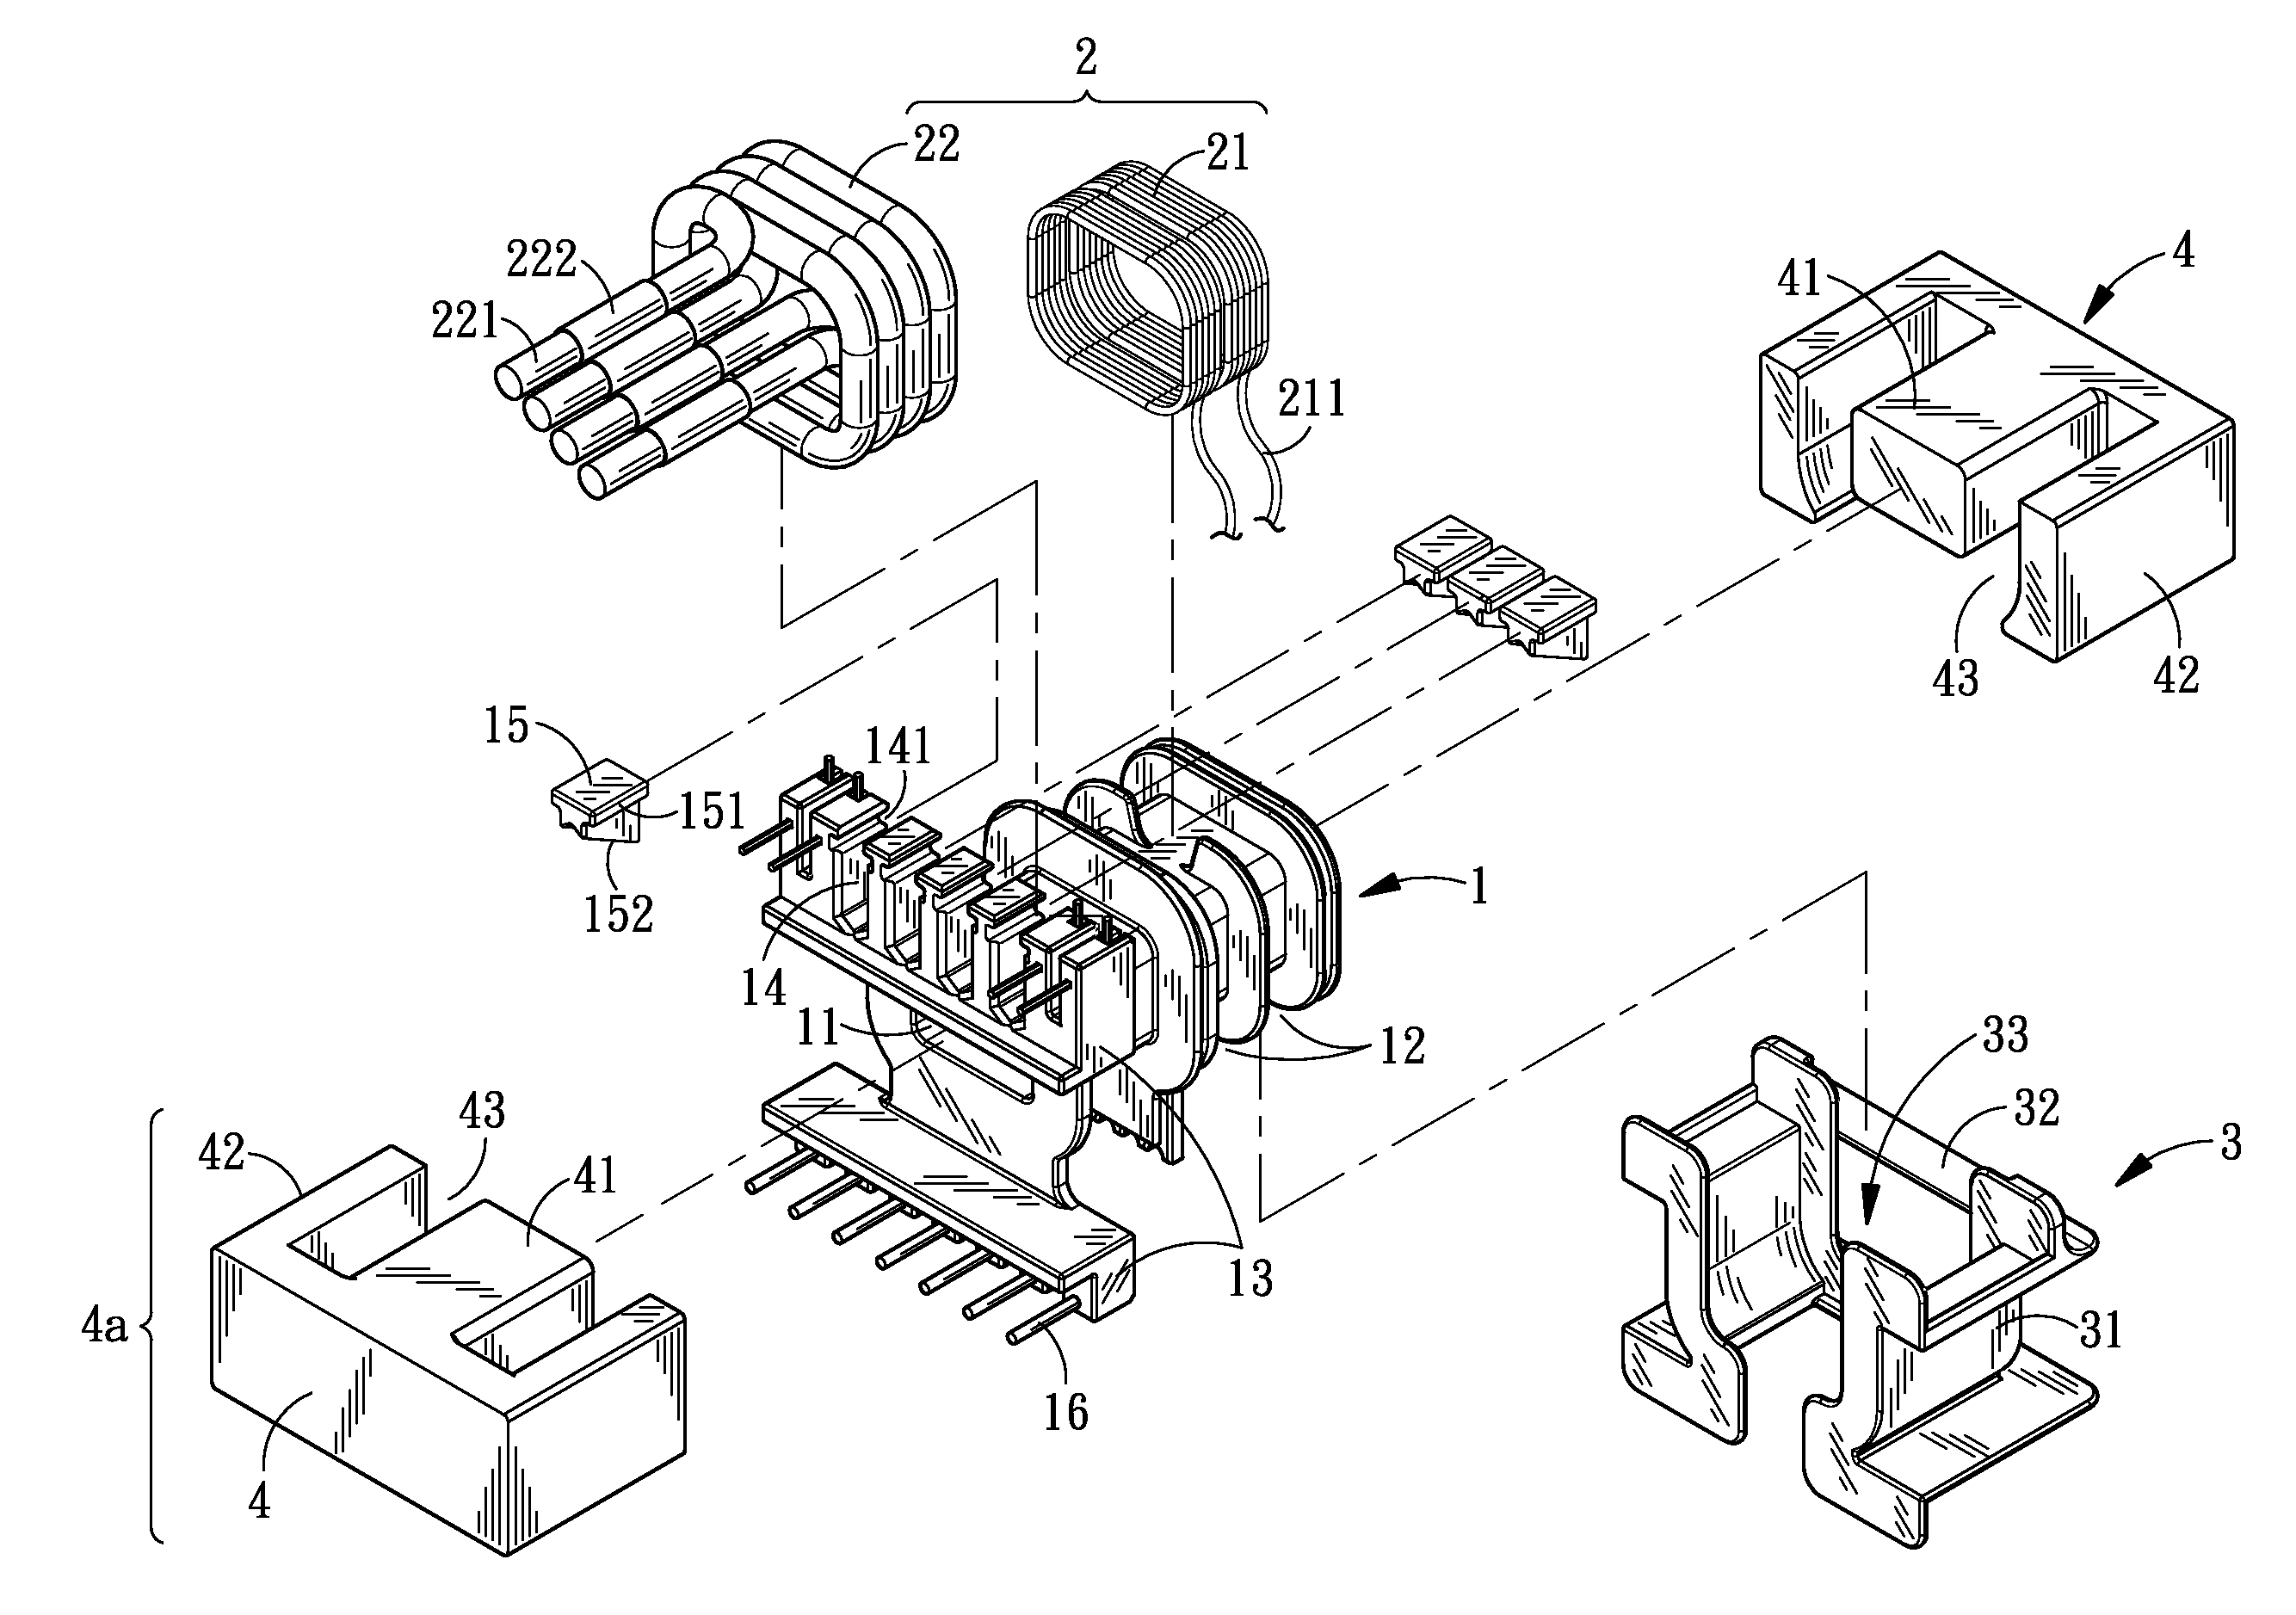 Structure of transformer